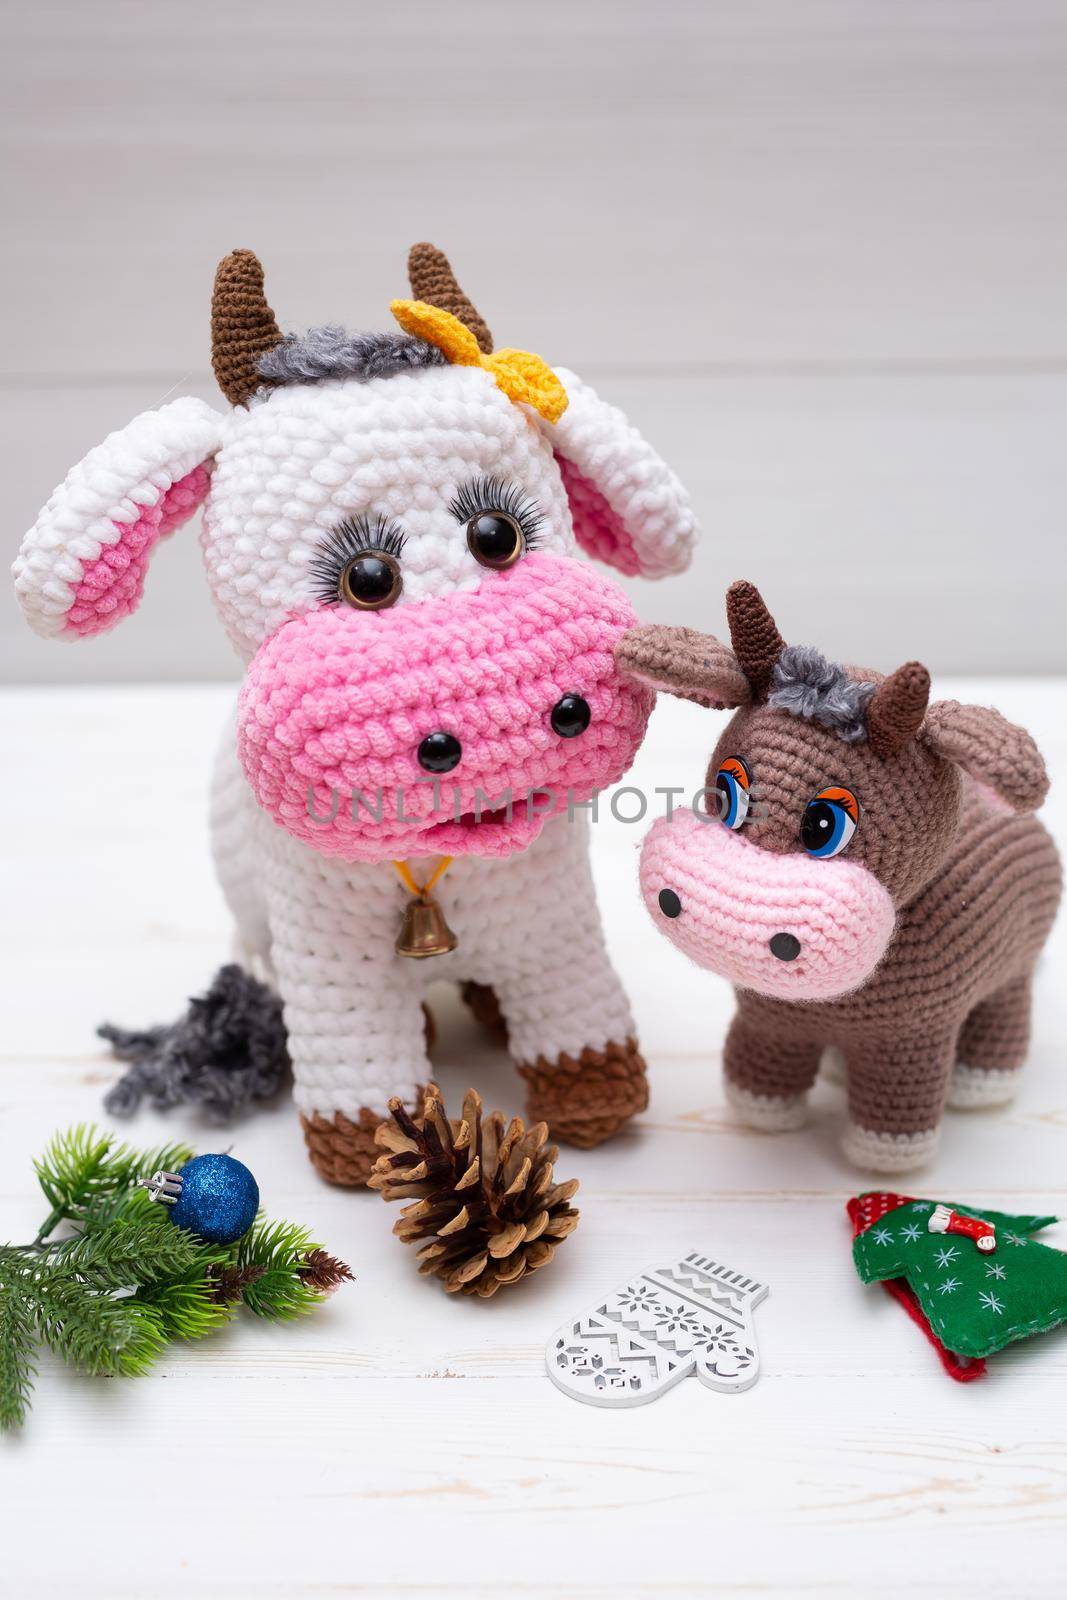 A knitted bull. A soft toy as a symbol of the New Year.